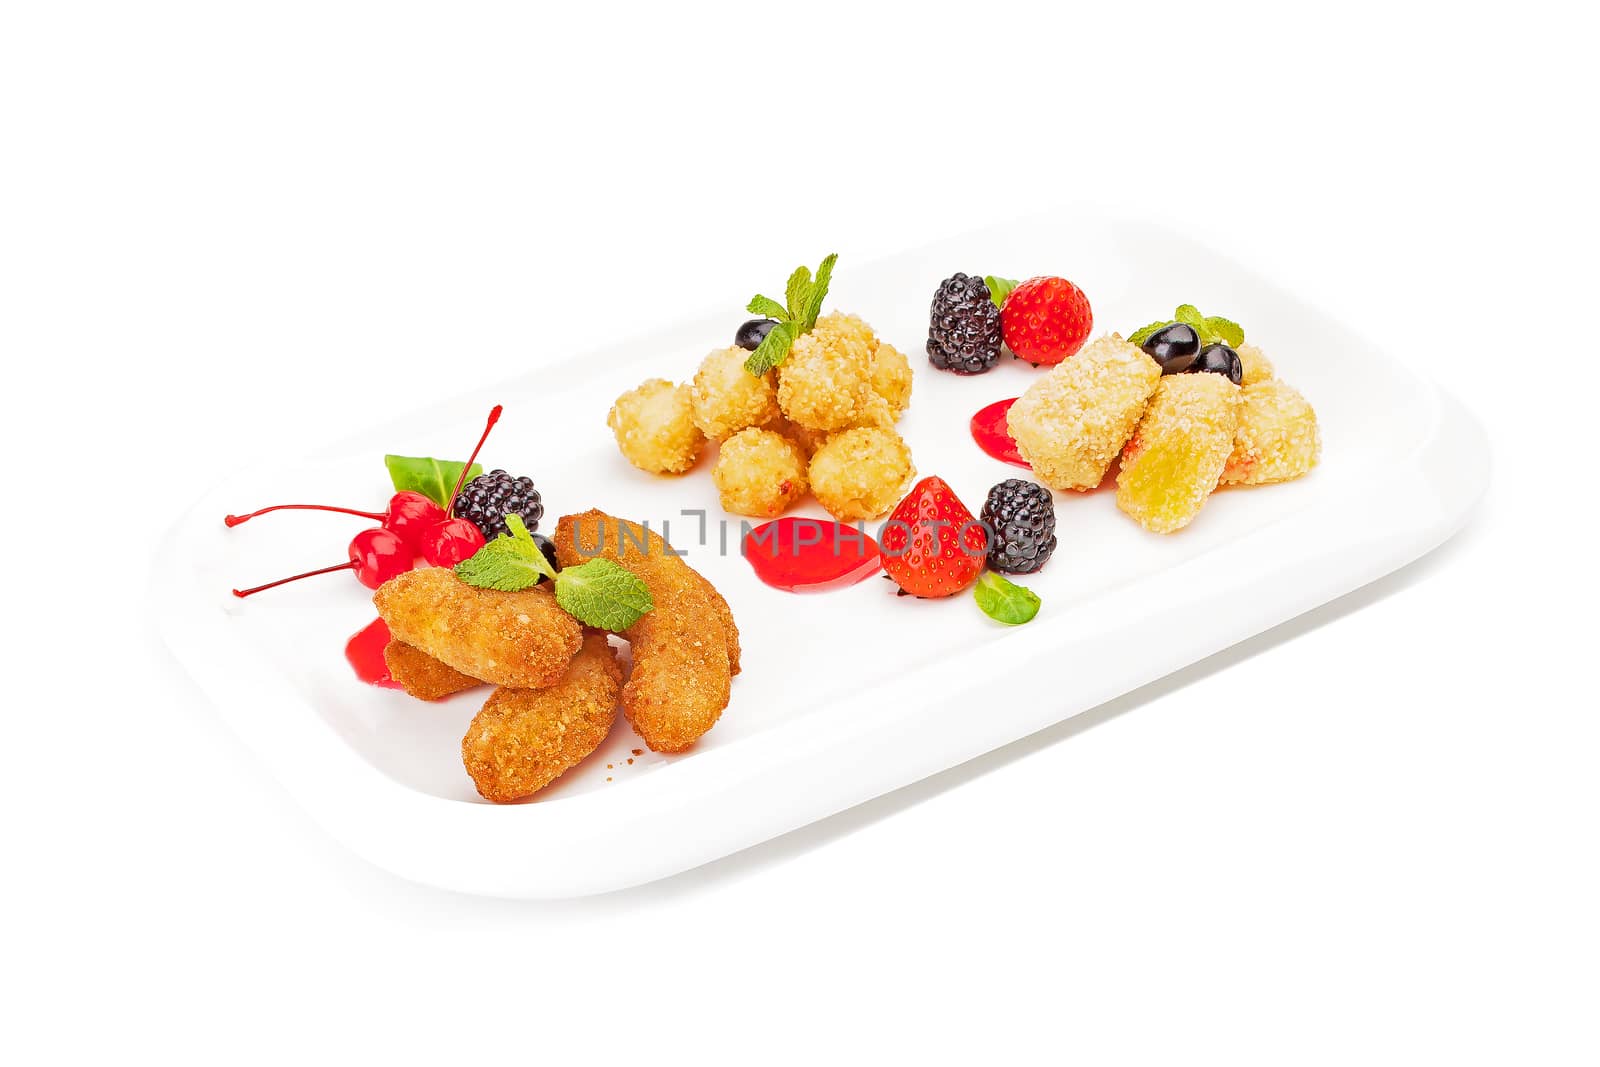 The meat balls and cheese sticks fried in breadcrumbs and served on a white dish, with strawberry, blackberry, bilberry, leaves of mint with cocktail cherries, isolated on a white background.